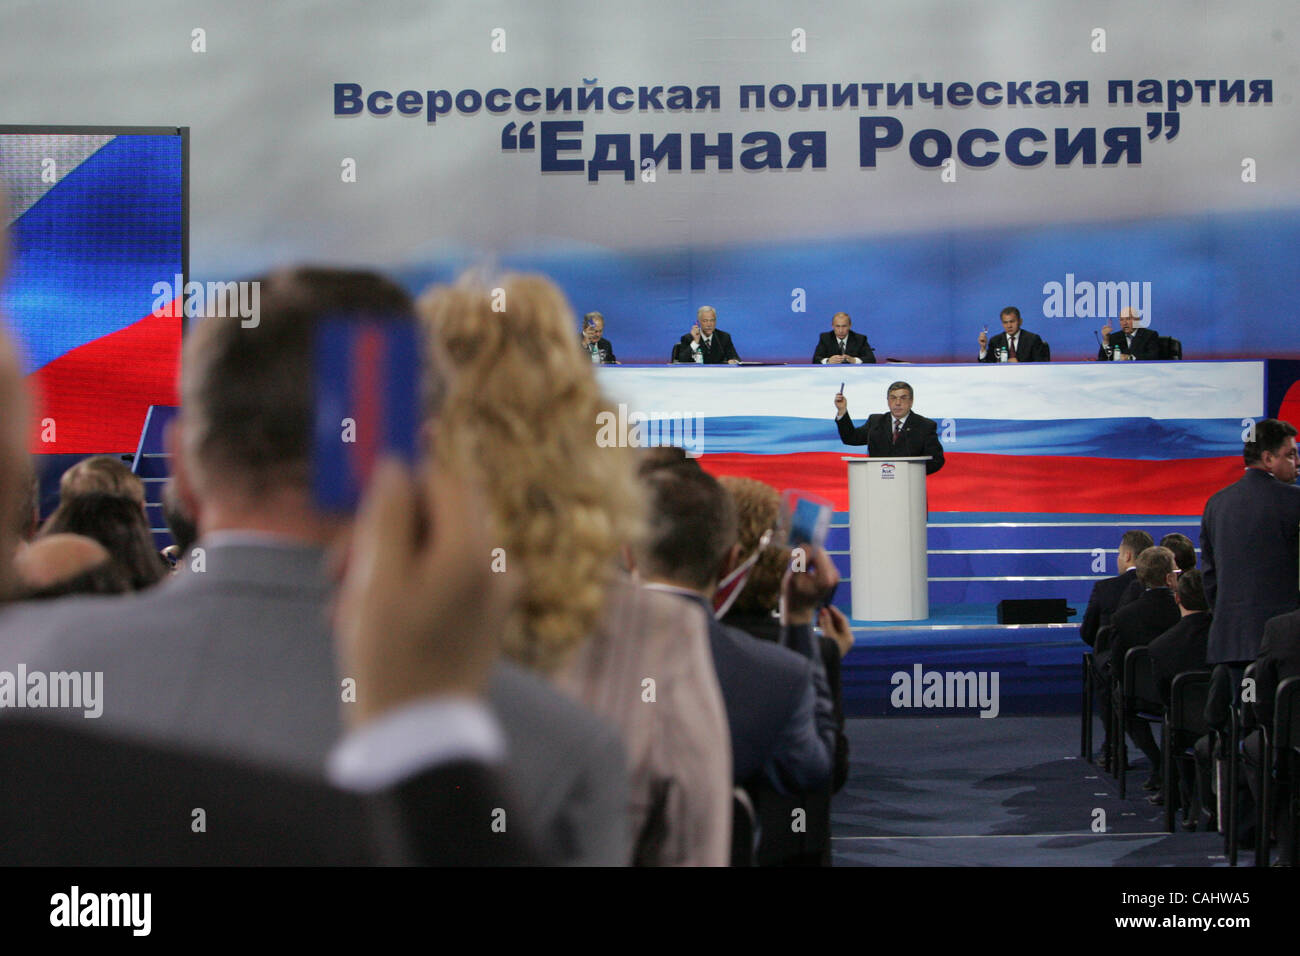 United Russia Party congress in Moscow. United Russia congress that almost unanimously elected Medvedev as the party`s candidate for the presidential election. In a rare show of disunity in the pro-Putin party, a single delegate opposed Medvedev in the 478-1 vote. The identity of the dissenter was u Stock Photo